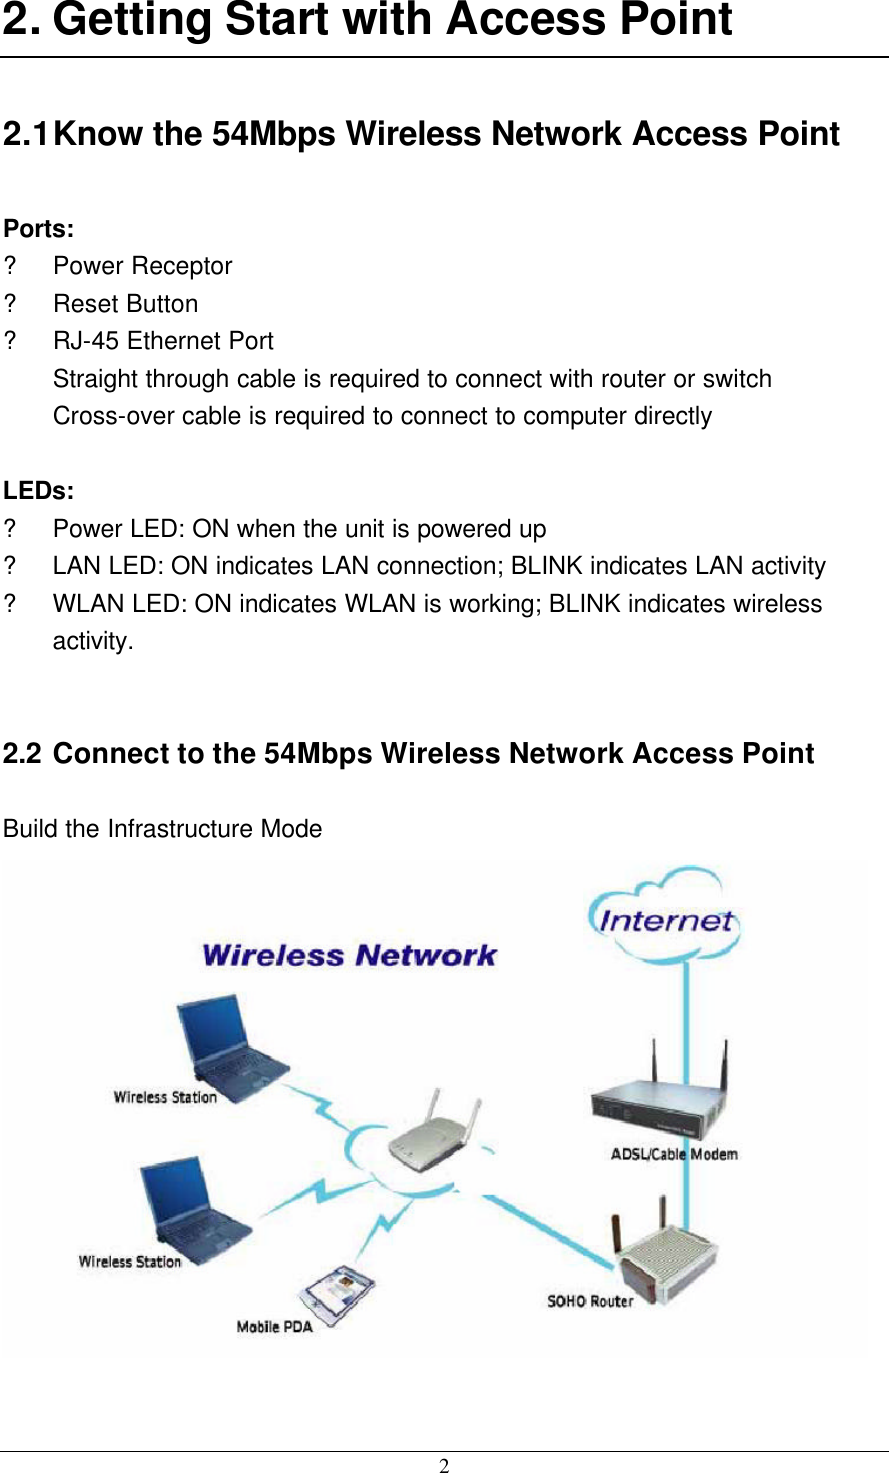  2 2. Getting Start with Access Point  2.1 Know the 54Mbps Wireless Network Access Point  Ports: ? Power Receptor ? Reset Button ? RJ-45 Ethernet Port Straight through cable is required to connect with router or switch Cross-over cable is required to connect to computer directly  LEDs: ? Power LED: ON when the unit is powered up ? LAN LED: ON indicates LAN connection; BLINK indicates LAN activity ? WLAN LED: ON indicates WLAN is working; BLINK indicates wireless activity.  2.2 Connect to the 54Mbps Wireless Network Access Point Build the Infrastructure Mode   